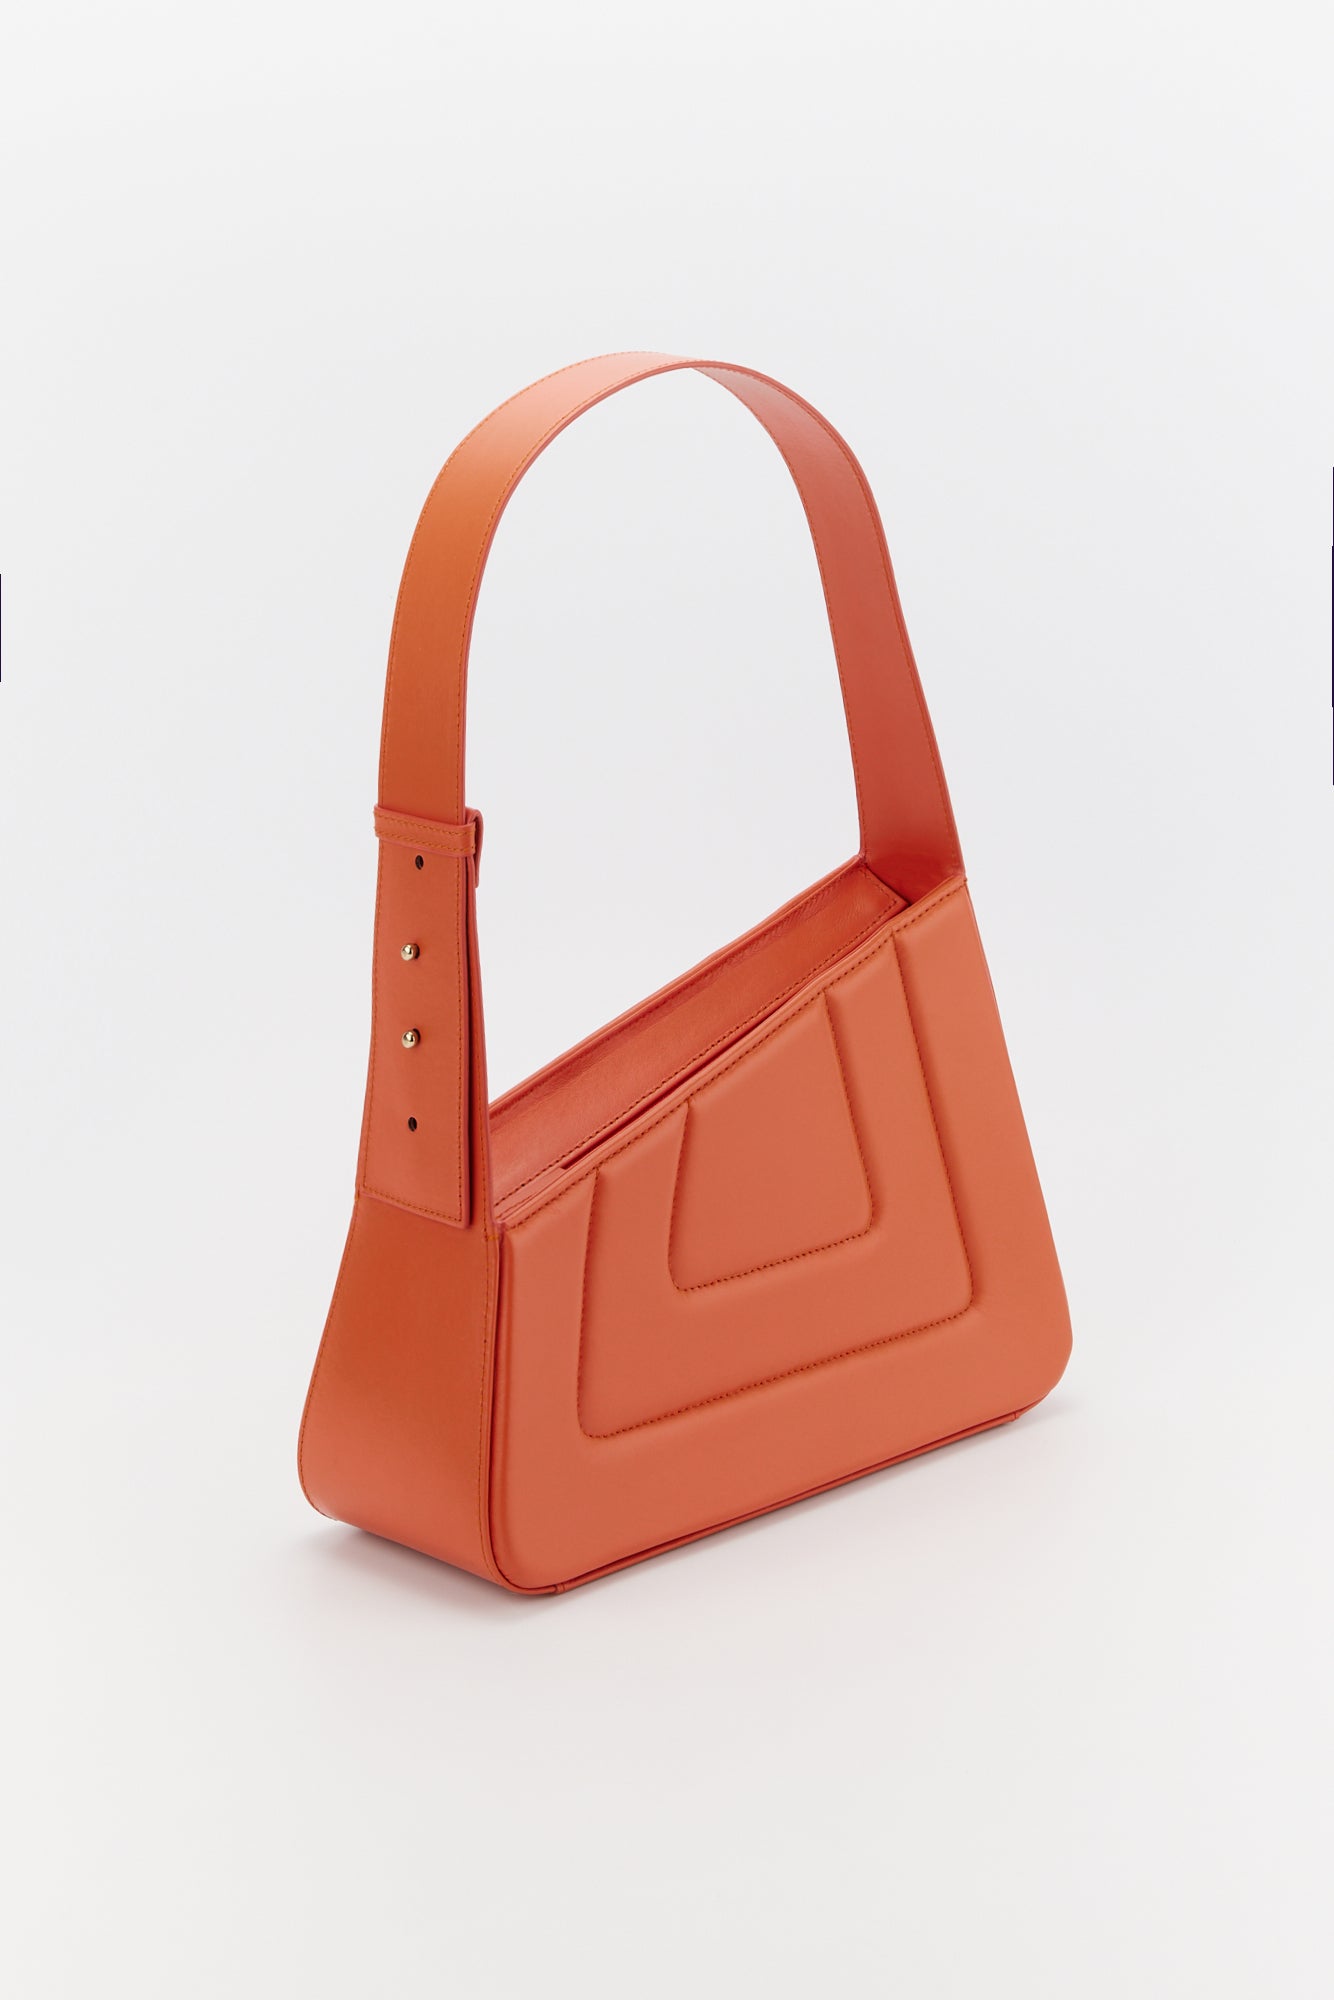 ORANGE Asymmetric Leather Quilted Bag